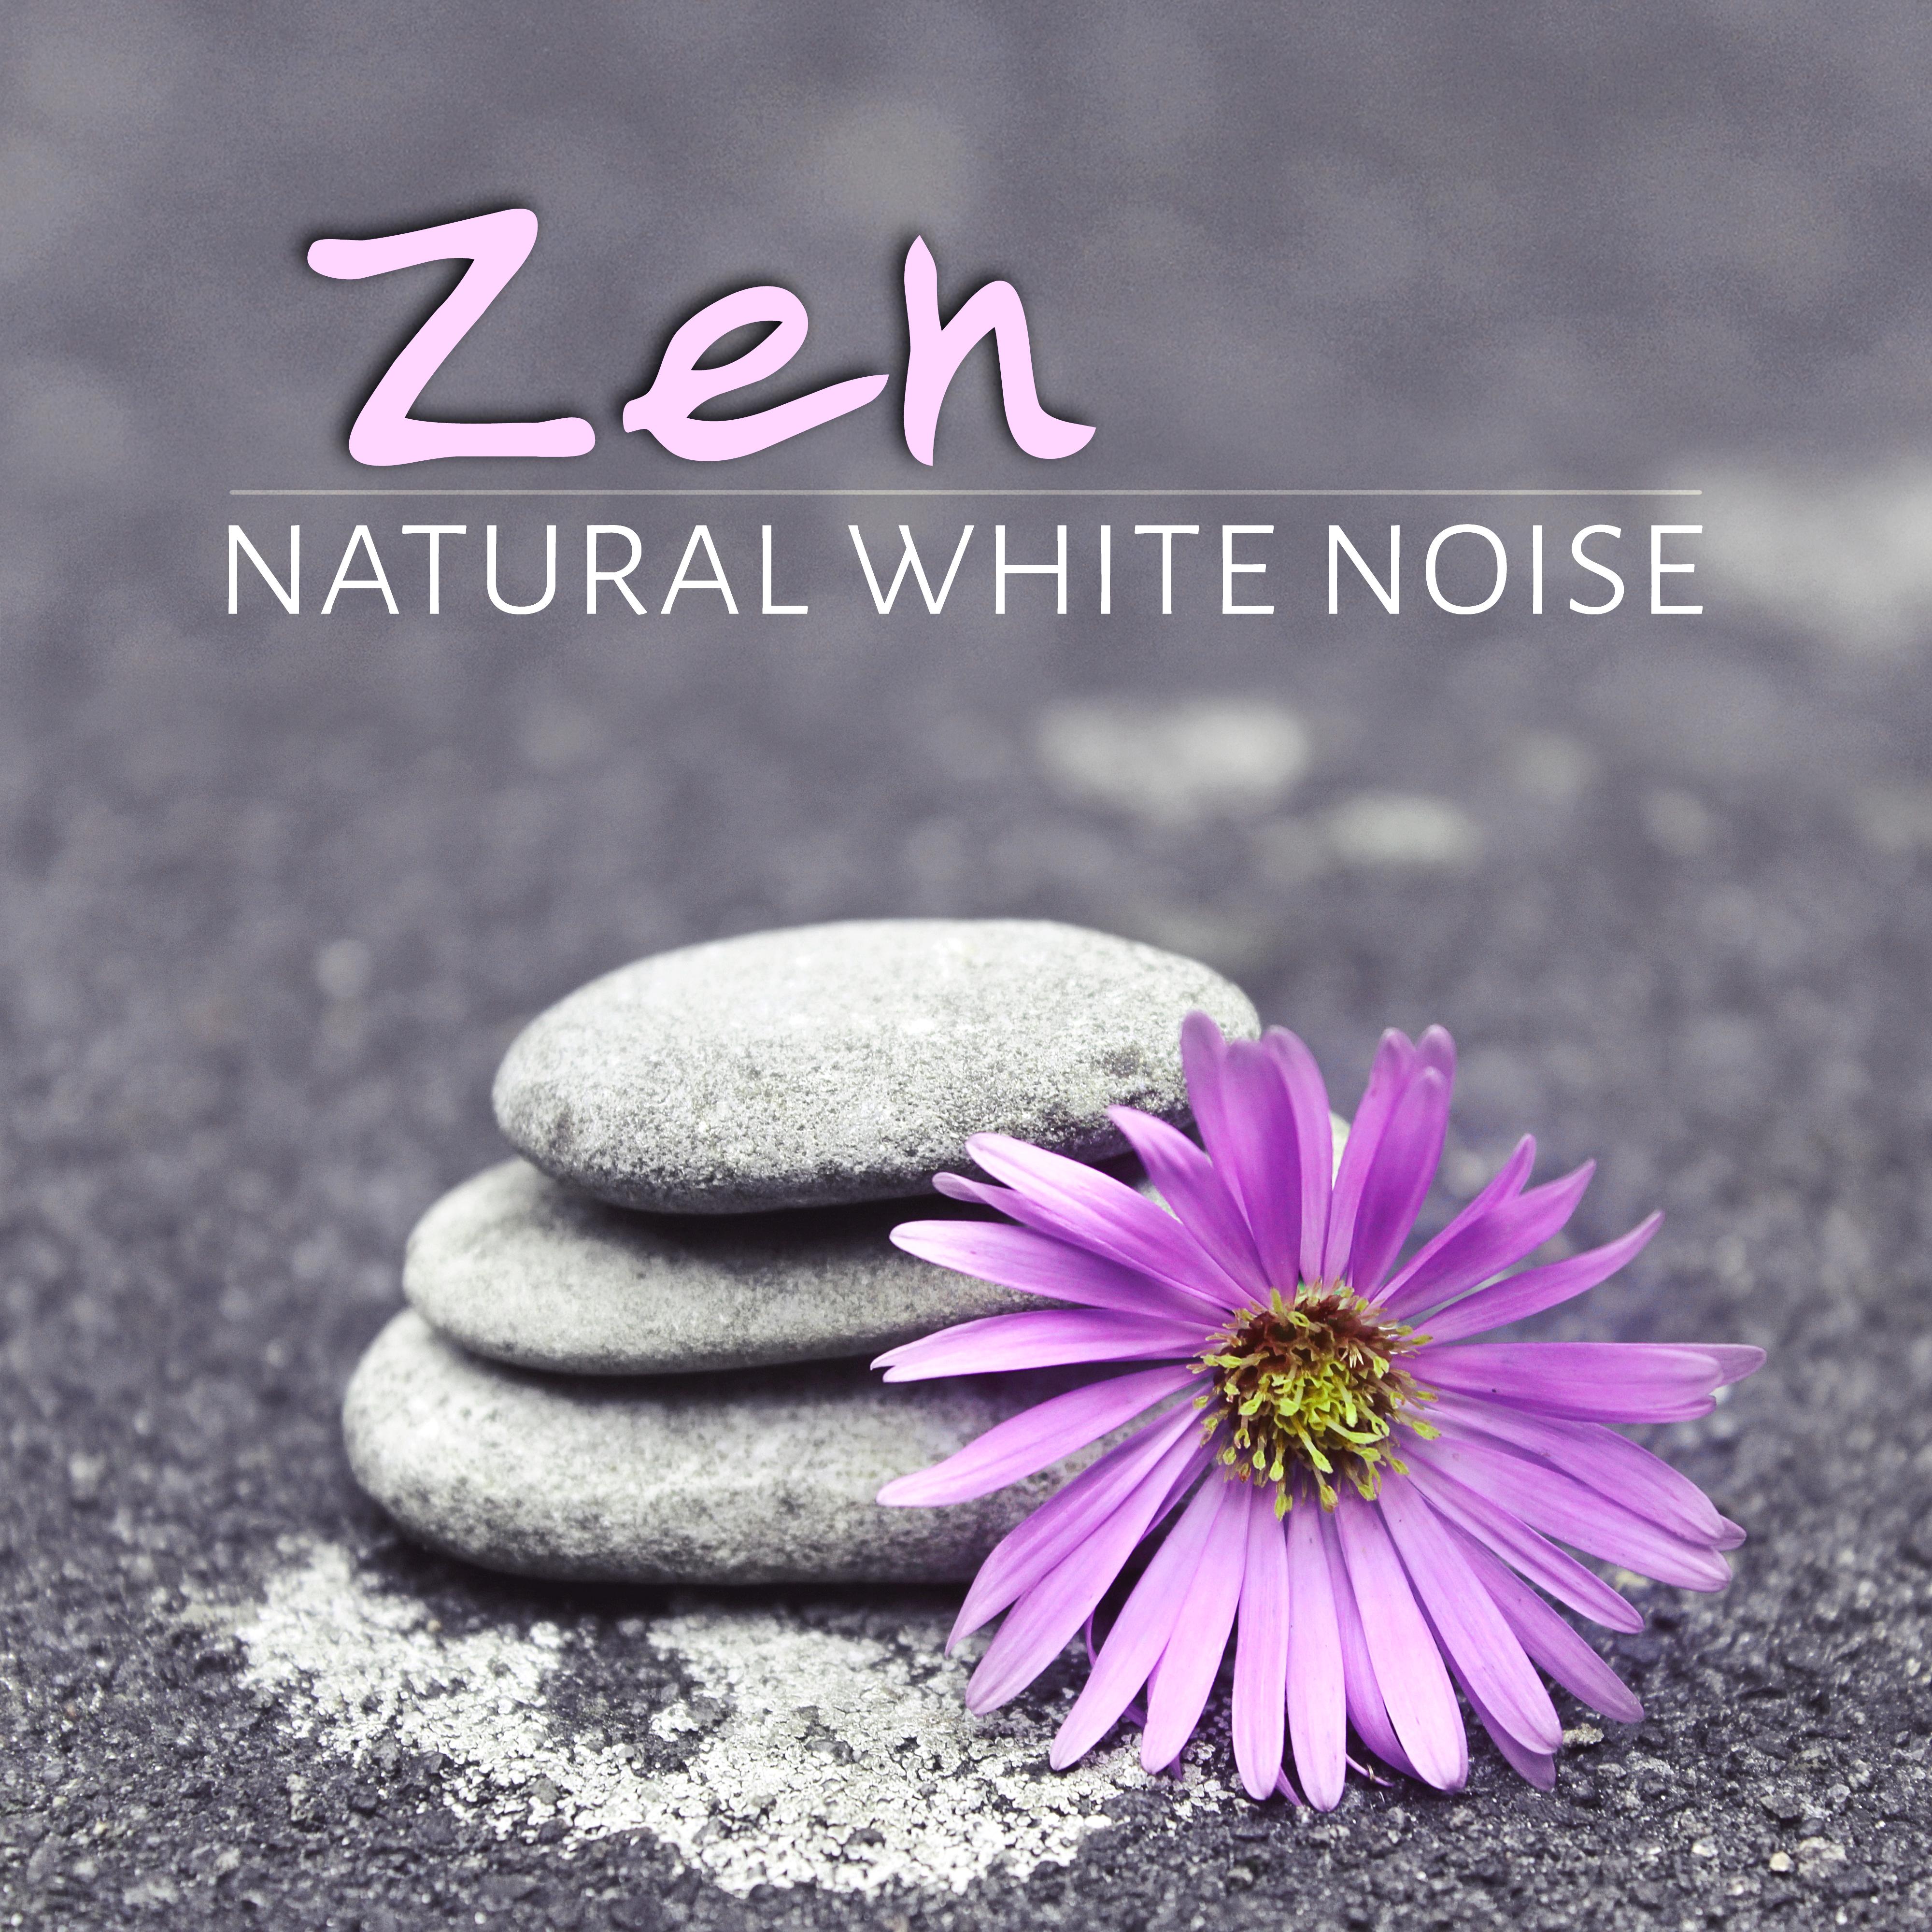 Zen Natural White Noise - Relaxing Music for Yoga & Meditation, Serenity Spa, Inner Peace, Well Being, Sleep, Mindfulness, Massage Music